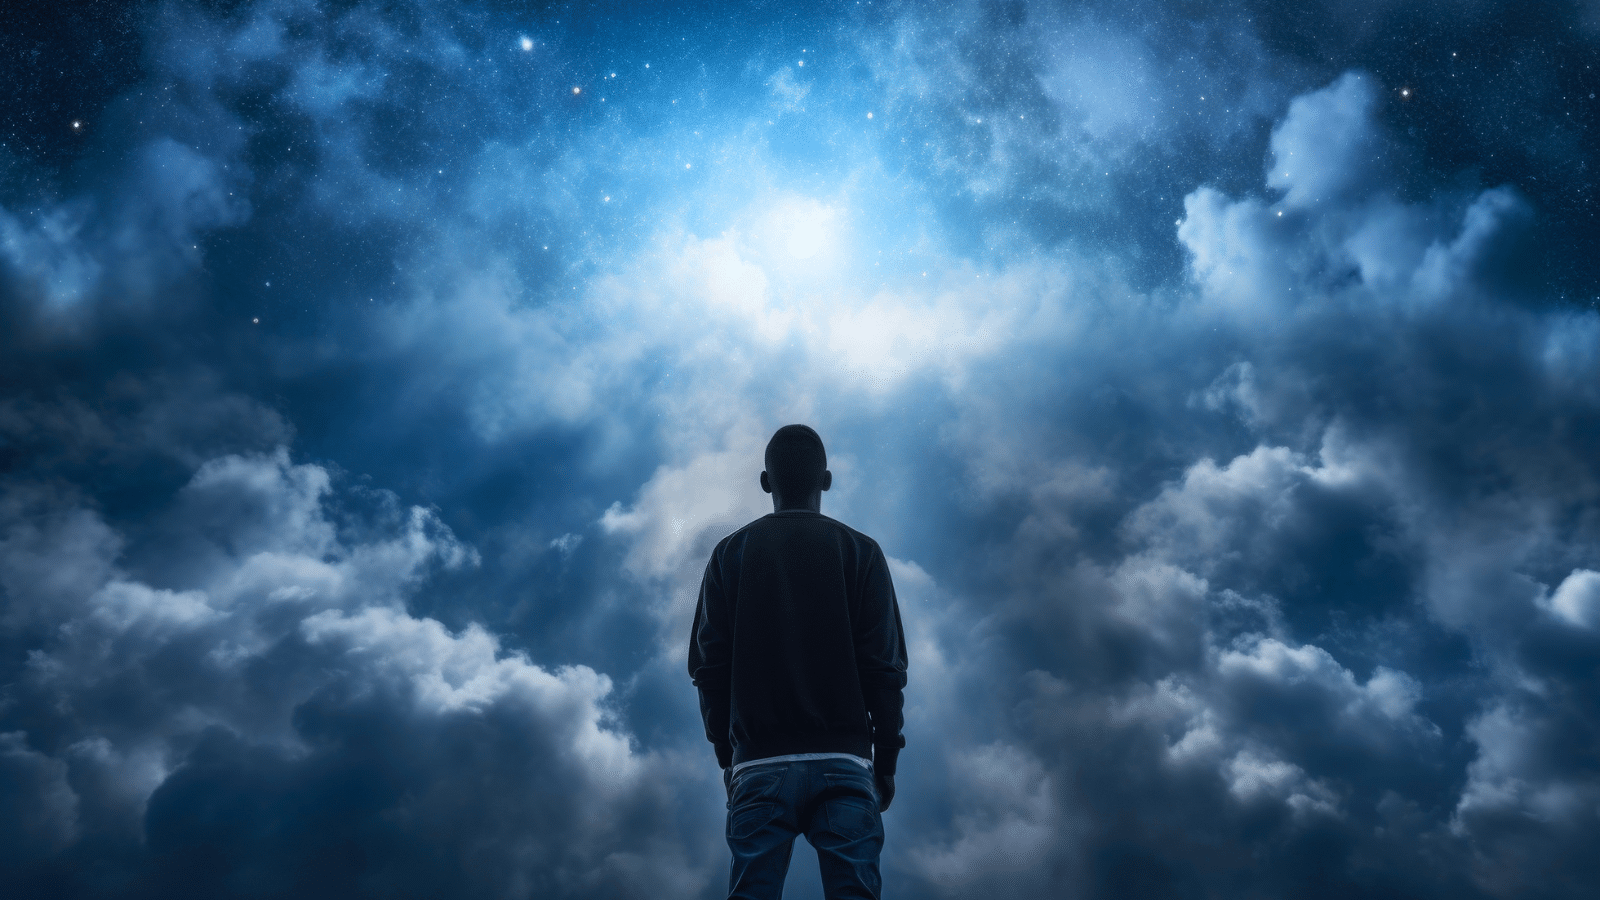 A man standing in front of dreamy clouds that look like heaven.